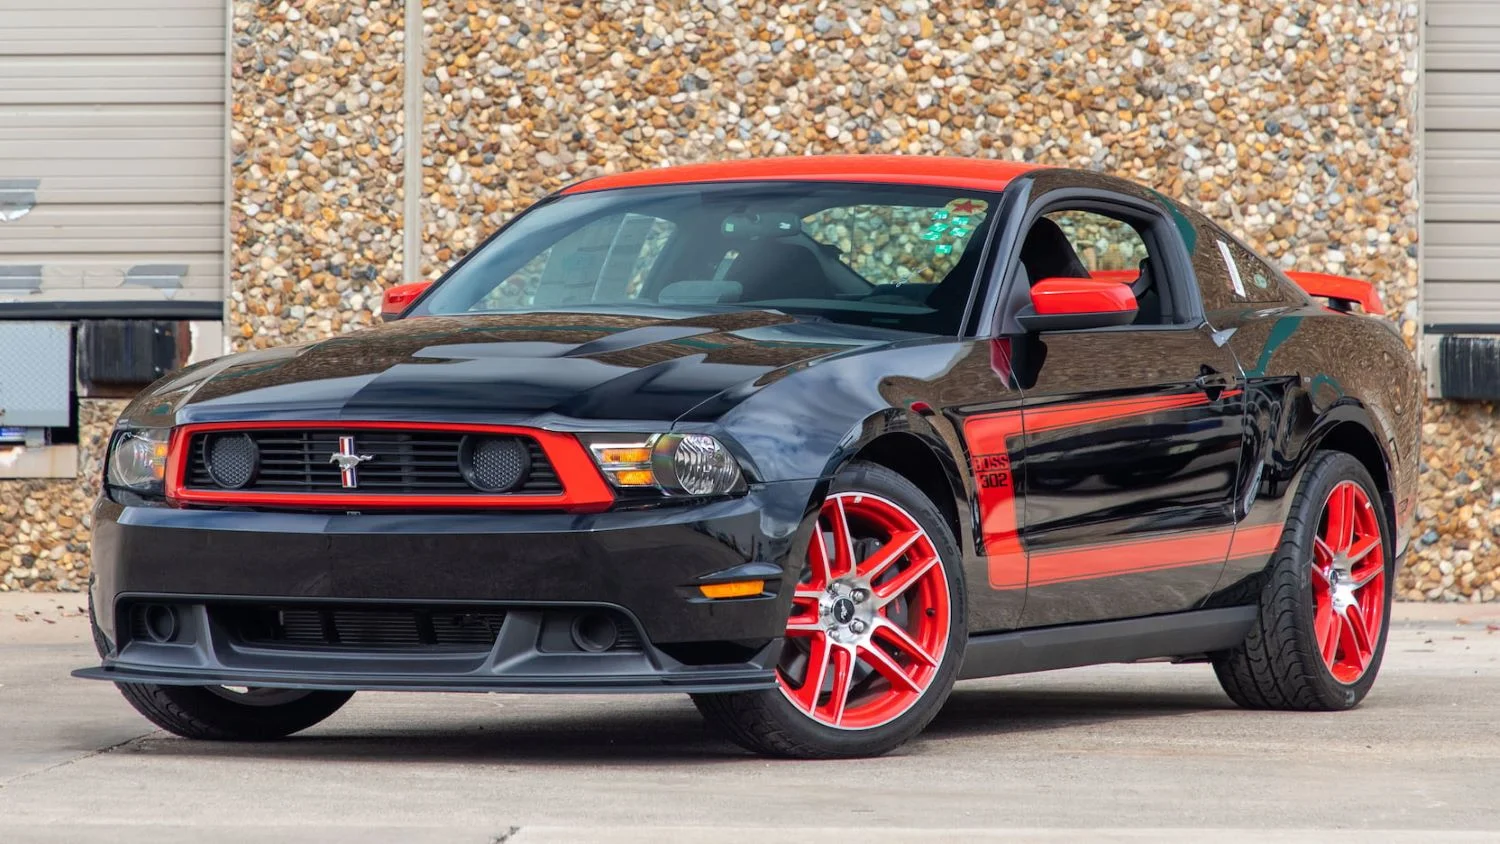 Mustang Boss Among Best Used Sports Cars Under $30K